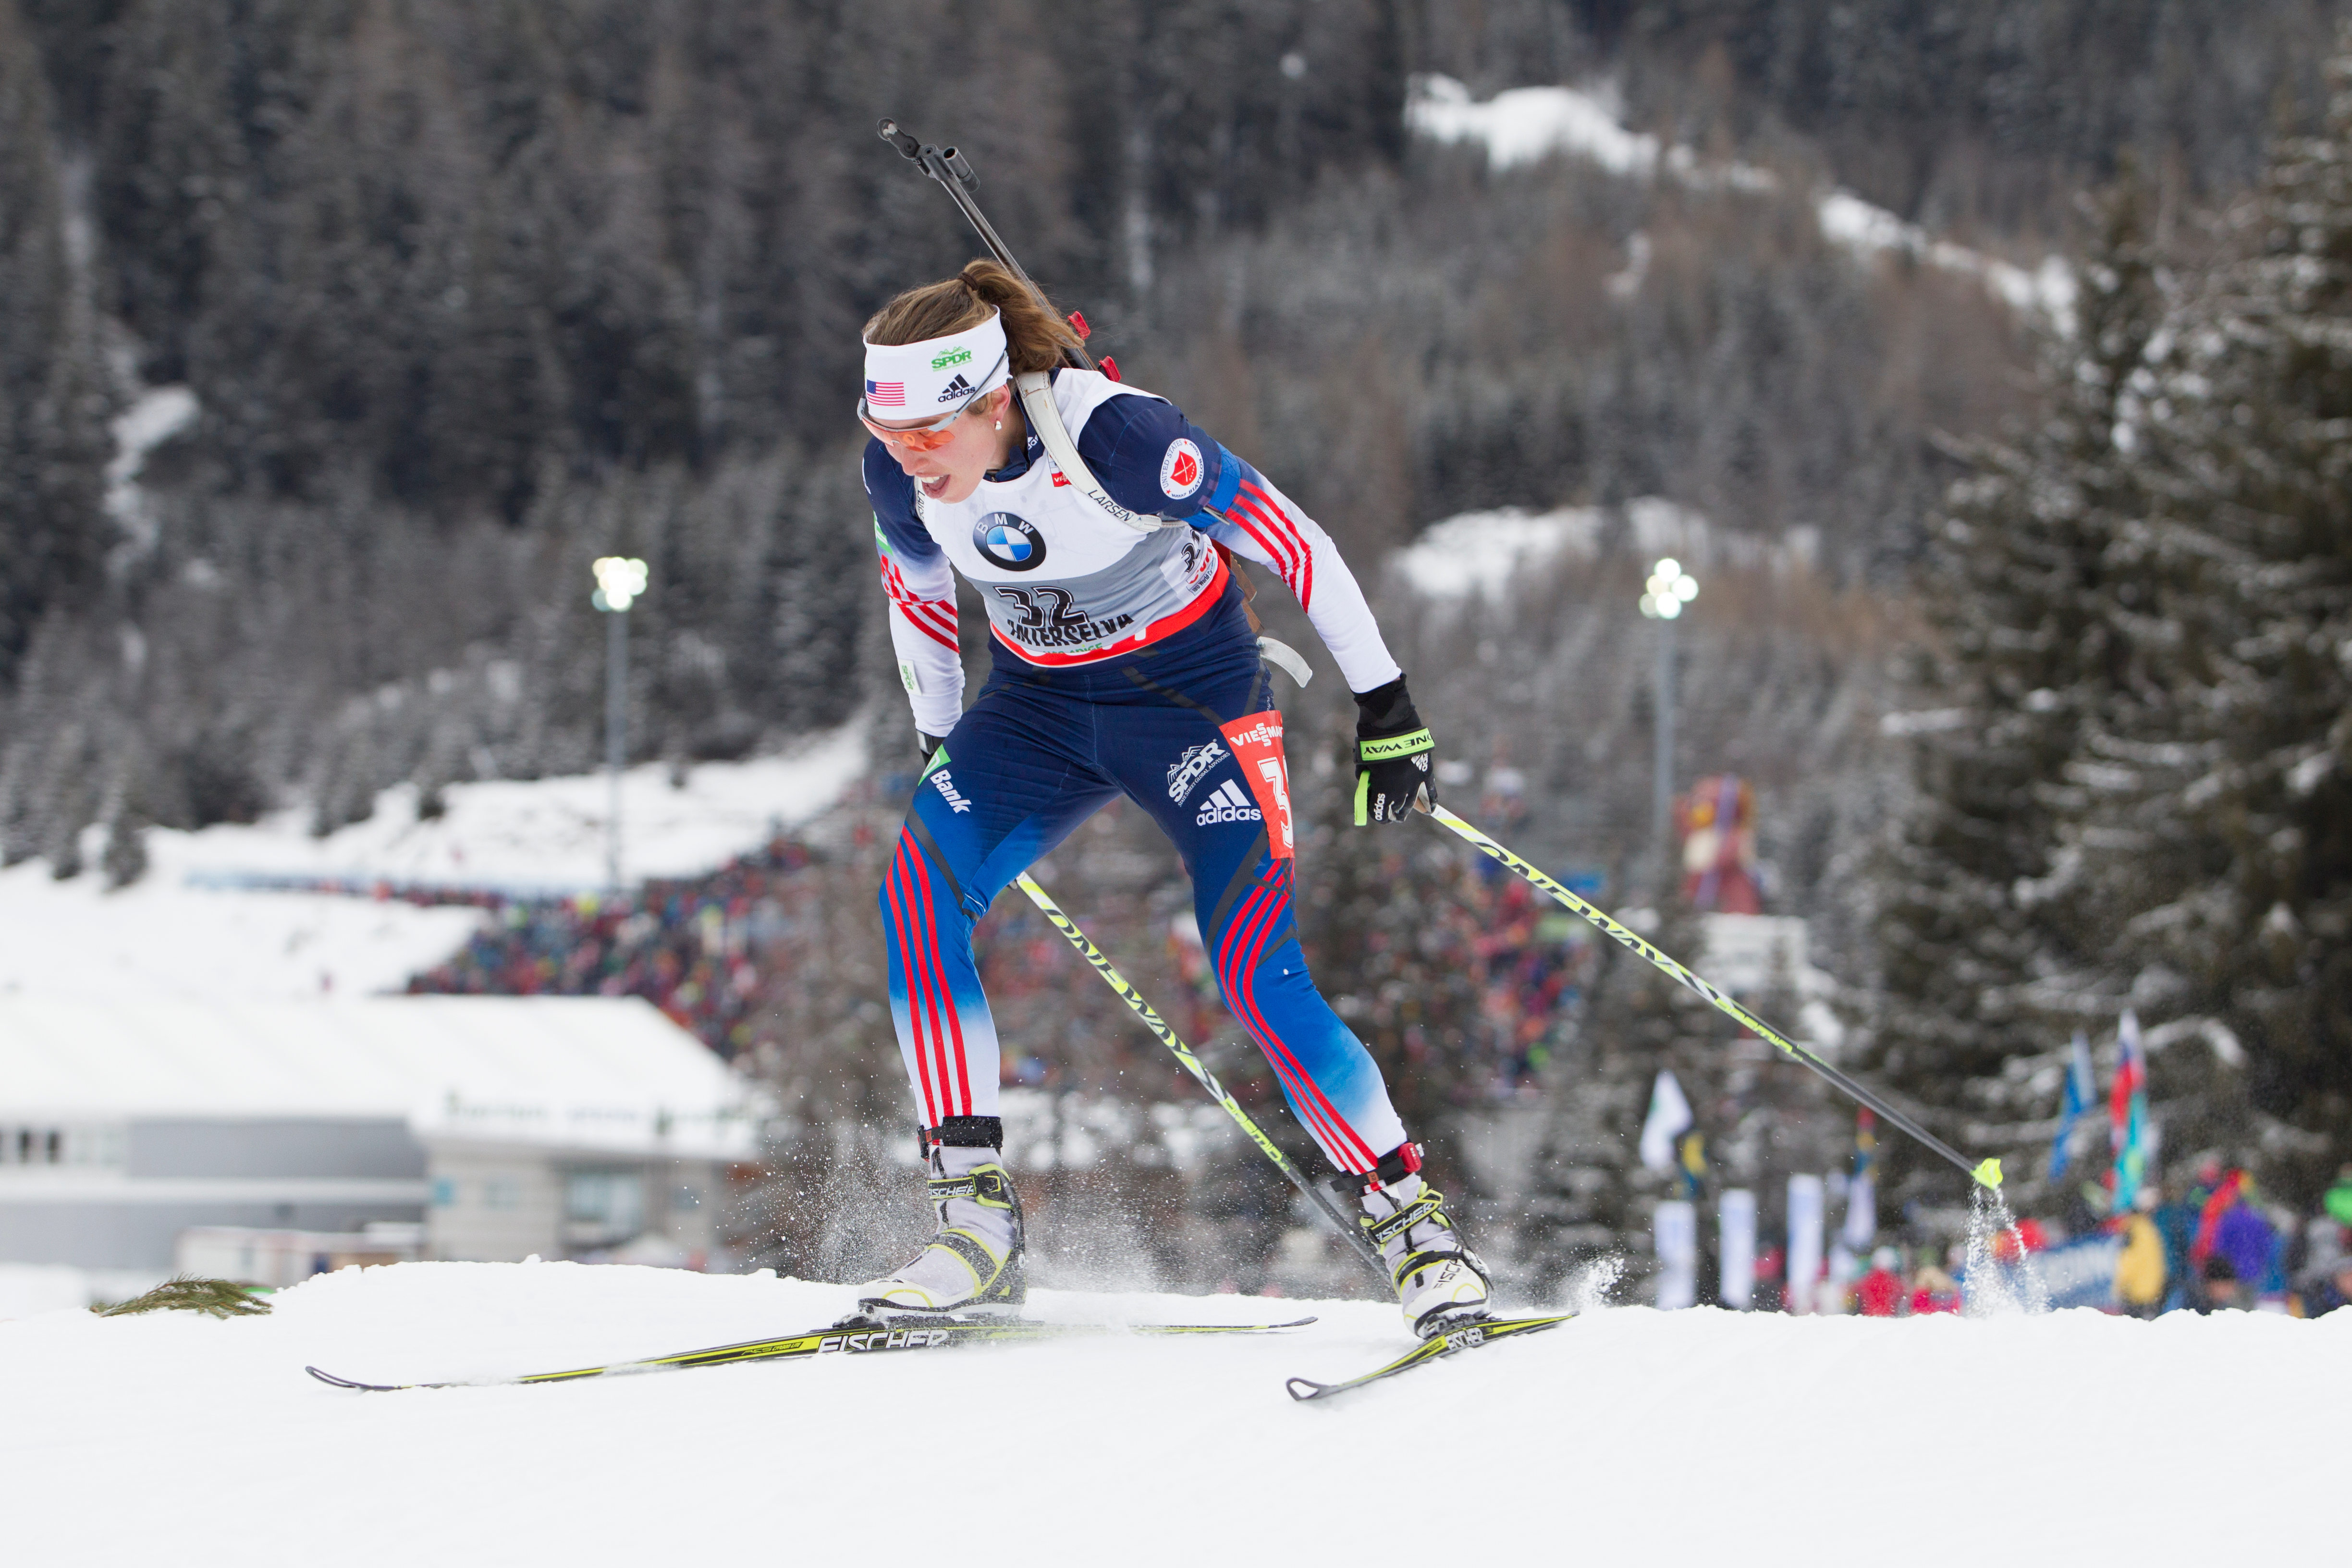 Dunklee Becomes First U.S. Female Biathlete to Place Fourth in World Cup Since 1994; Bescond Gets First Win in Antholz